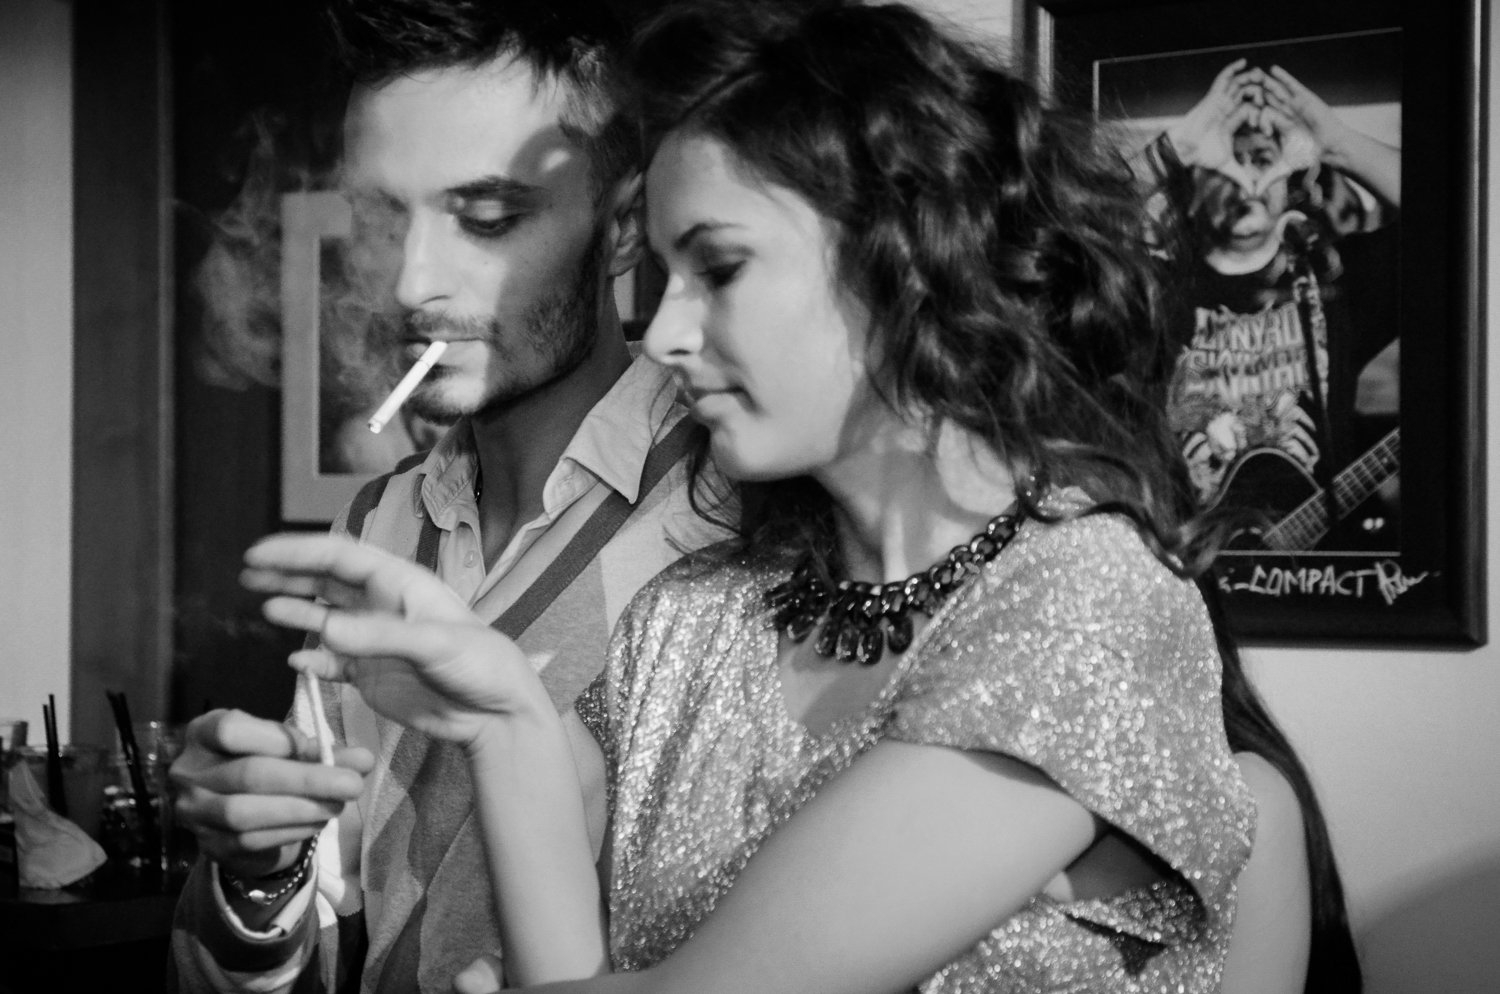 couple-guy-and-girl-smoking-in-the-nightclub-cosmin-cimil-photographer